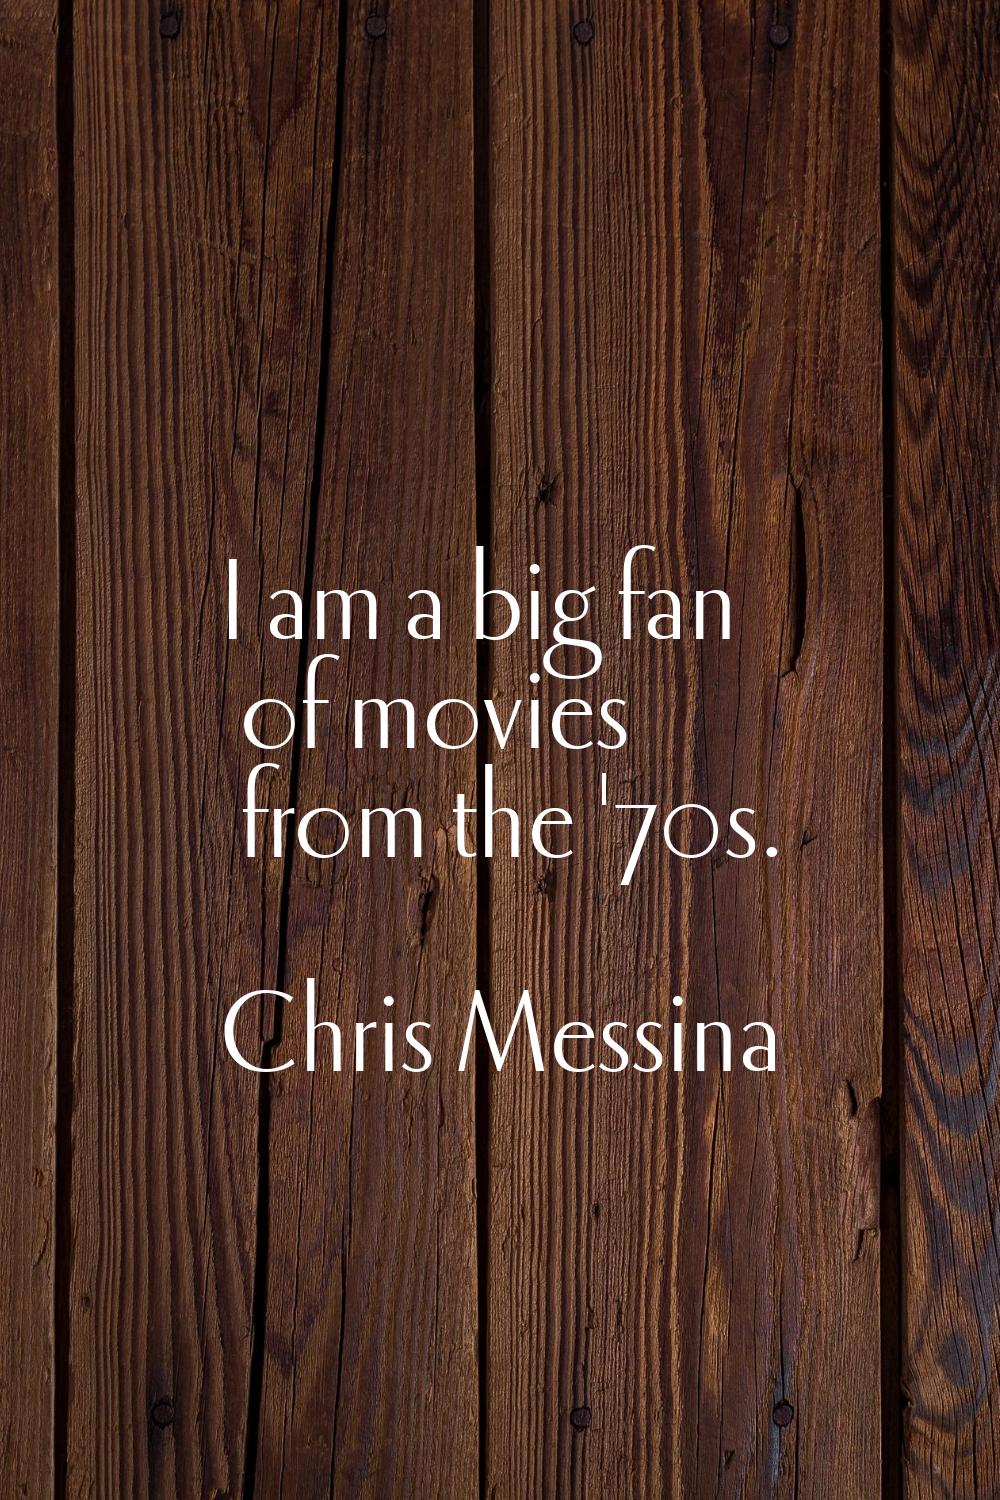 I am a big fan of movies from the '70s.